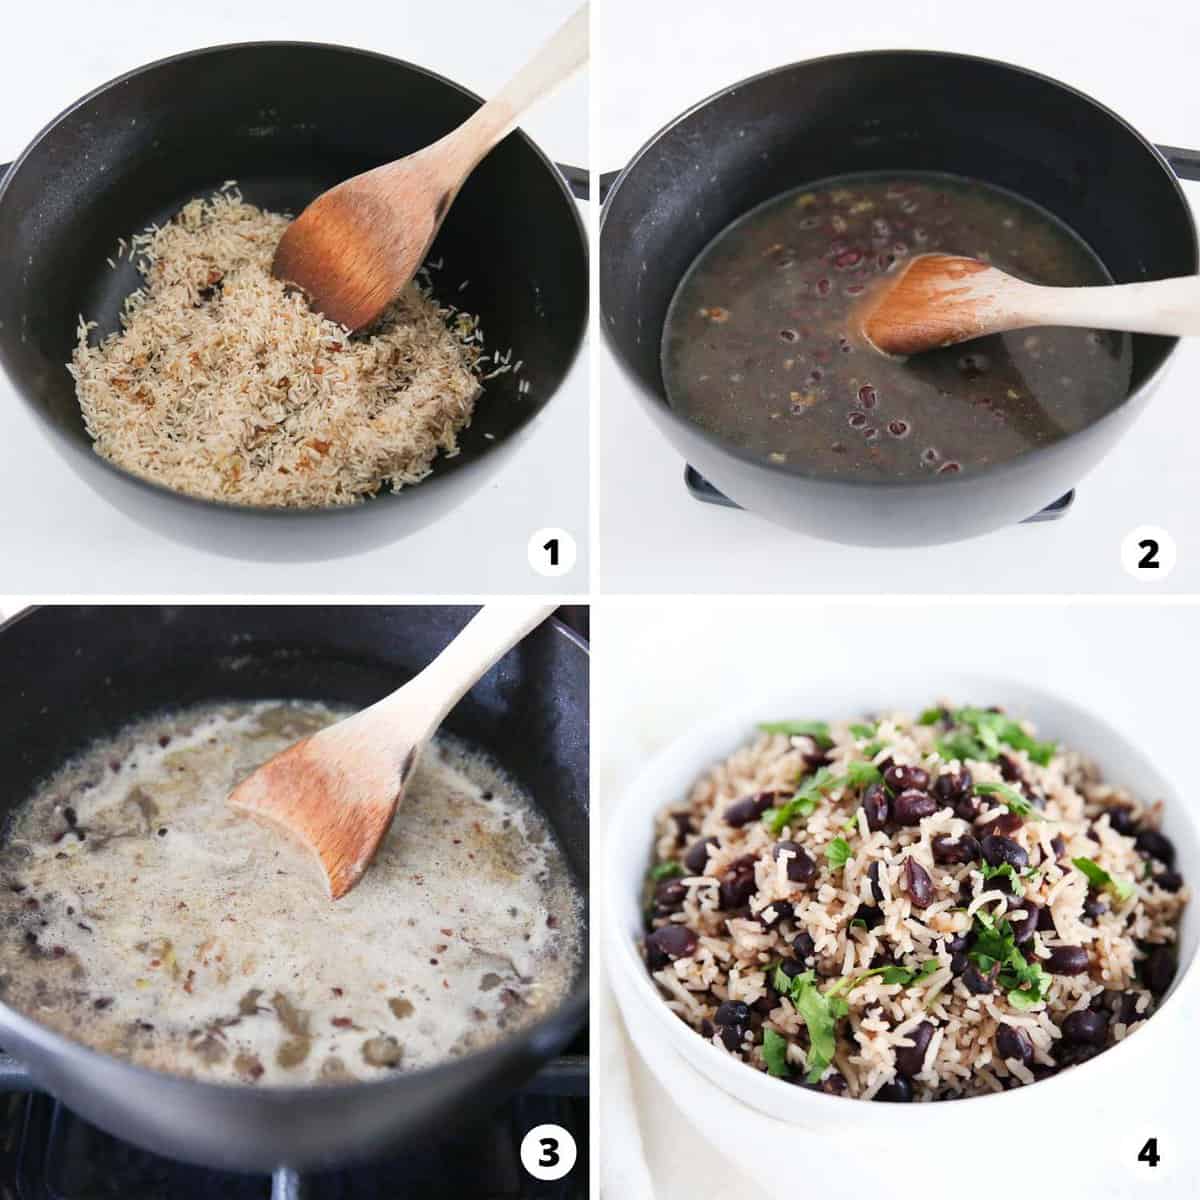 Showing how to make black beans and rice in a 4 step collage.